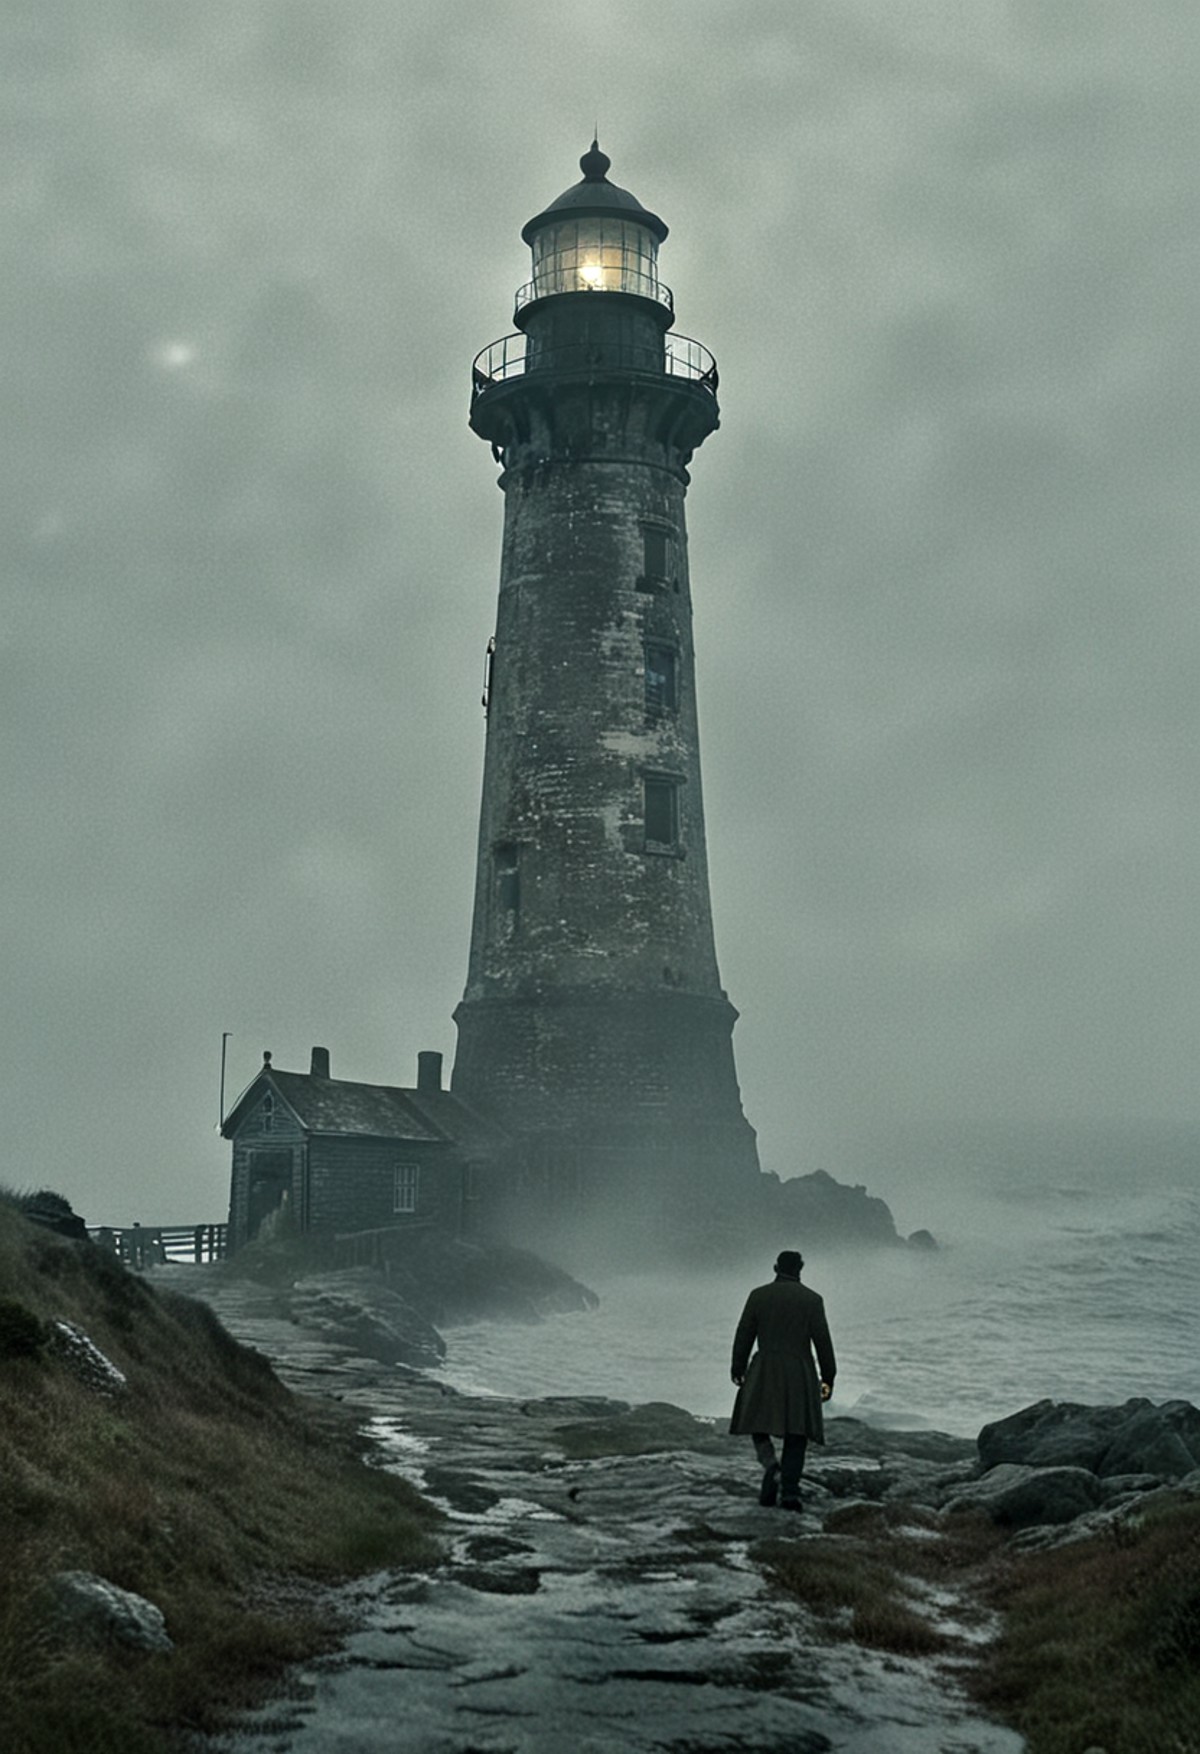 In a grainy, handheld video, a lone explorer investigates an old, decrepit lighthouse on a foggy night. As he ascends the ...